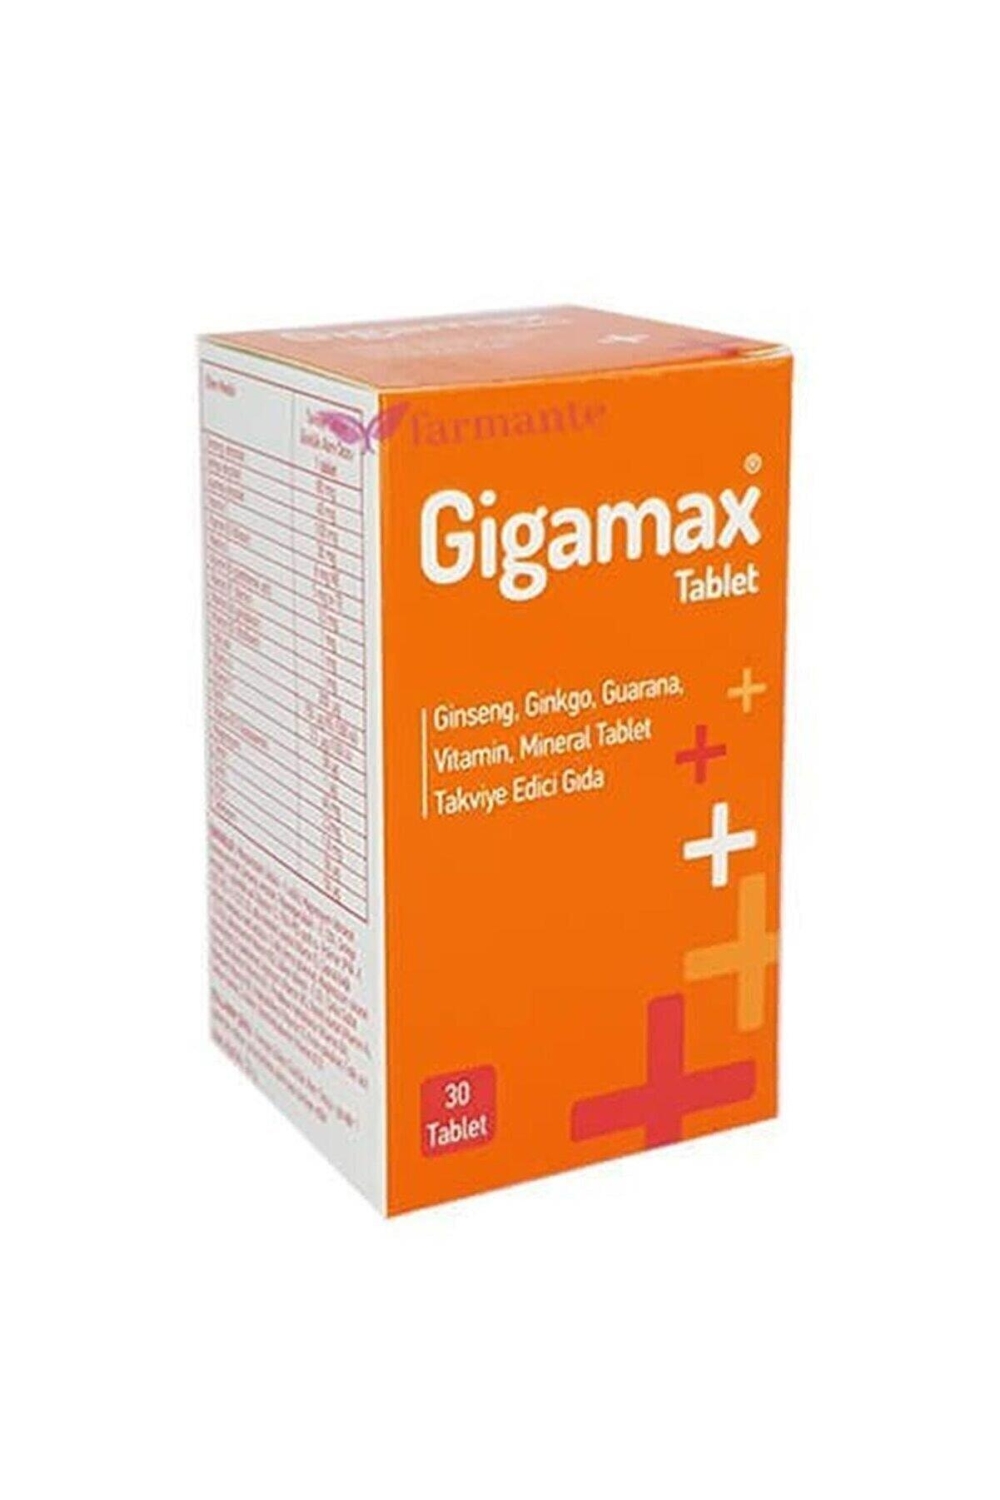 Gigamax 30 Tablet - 1